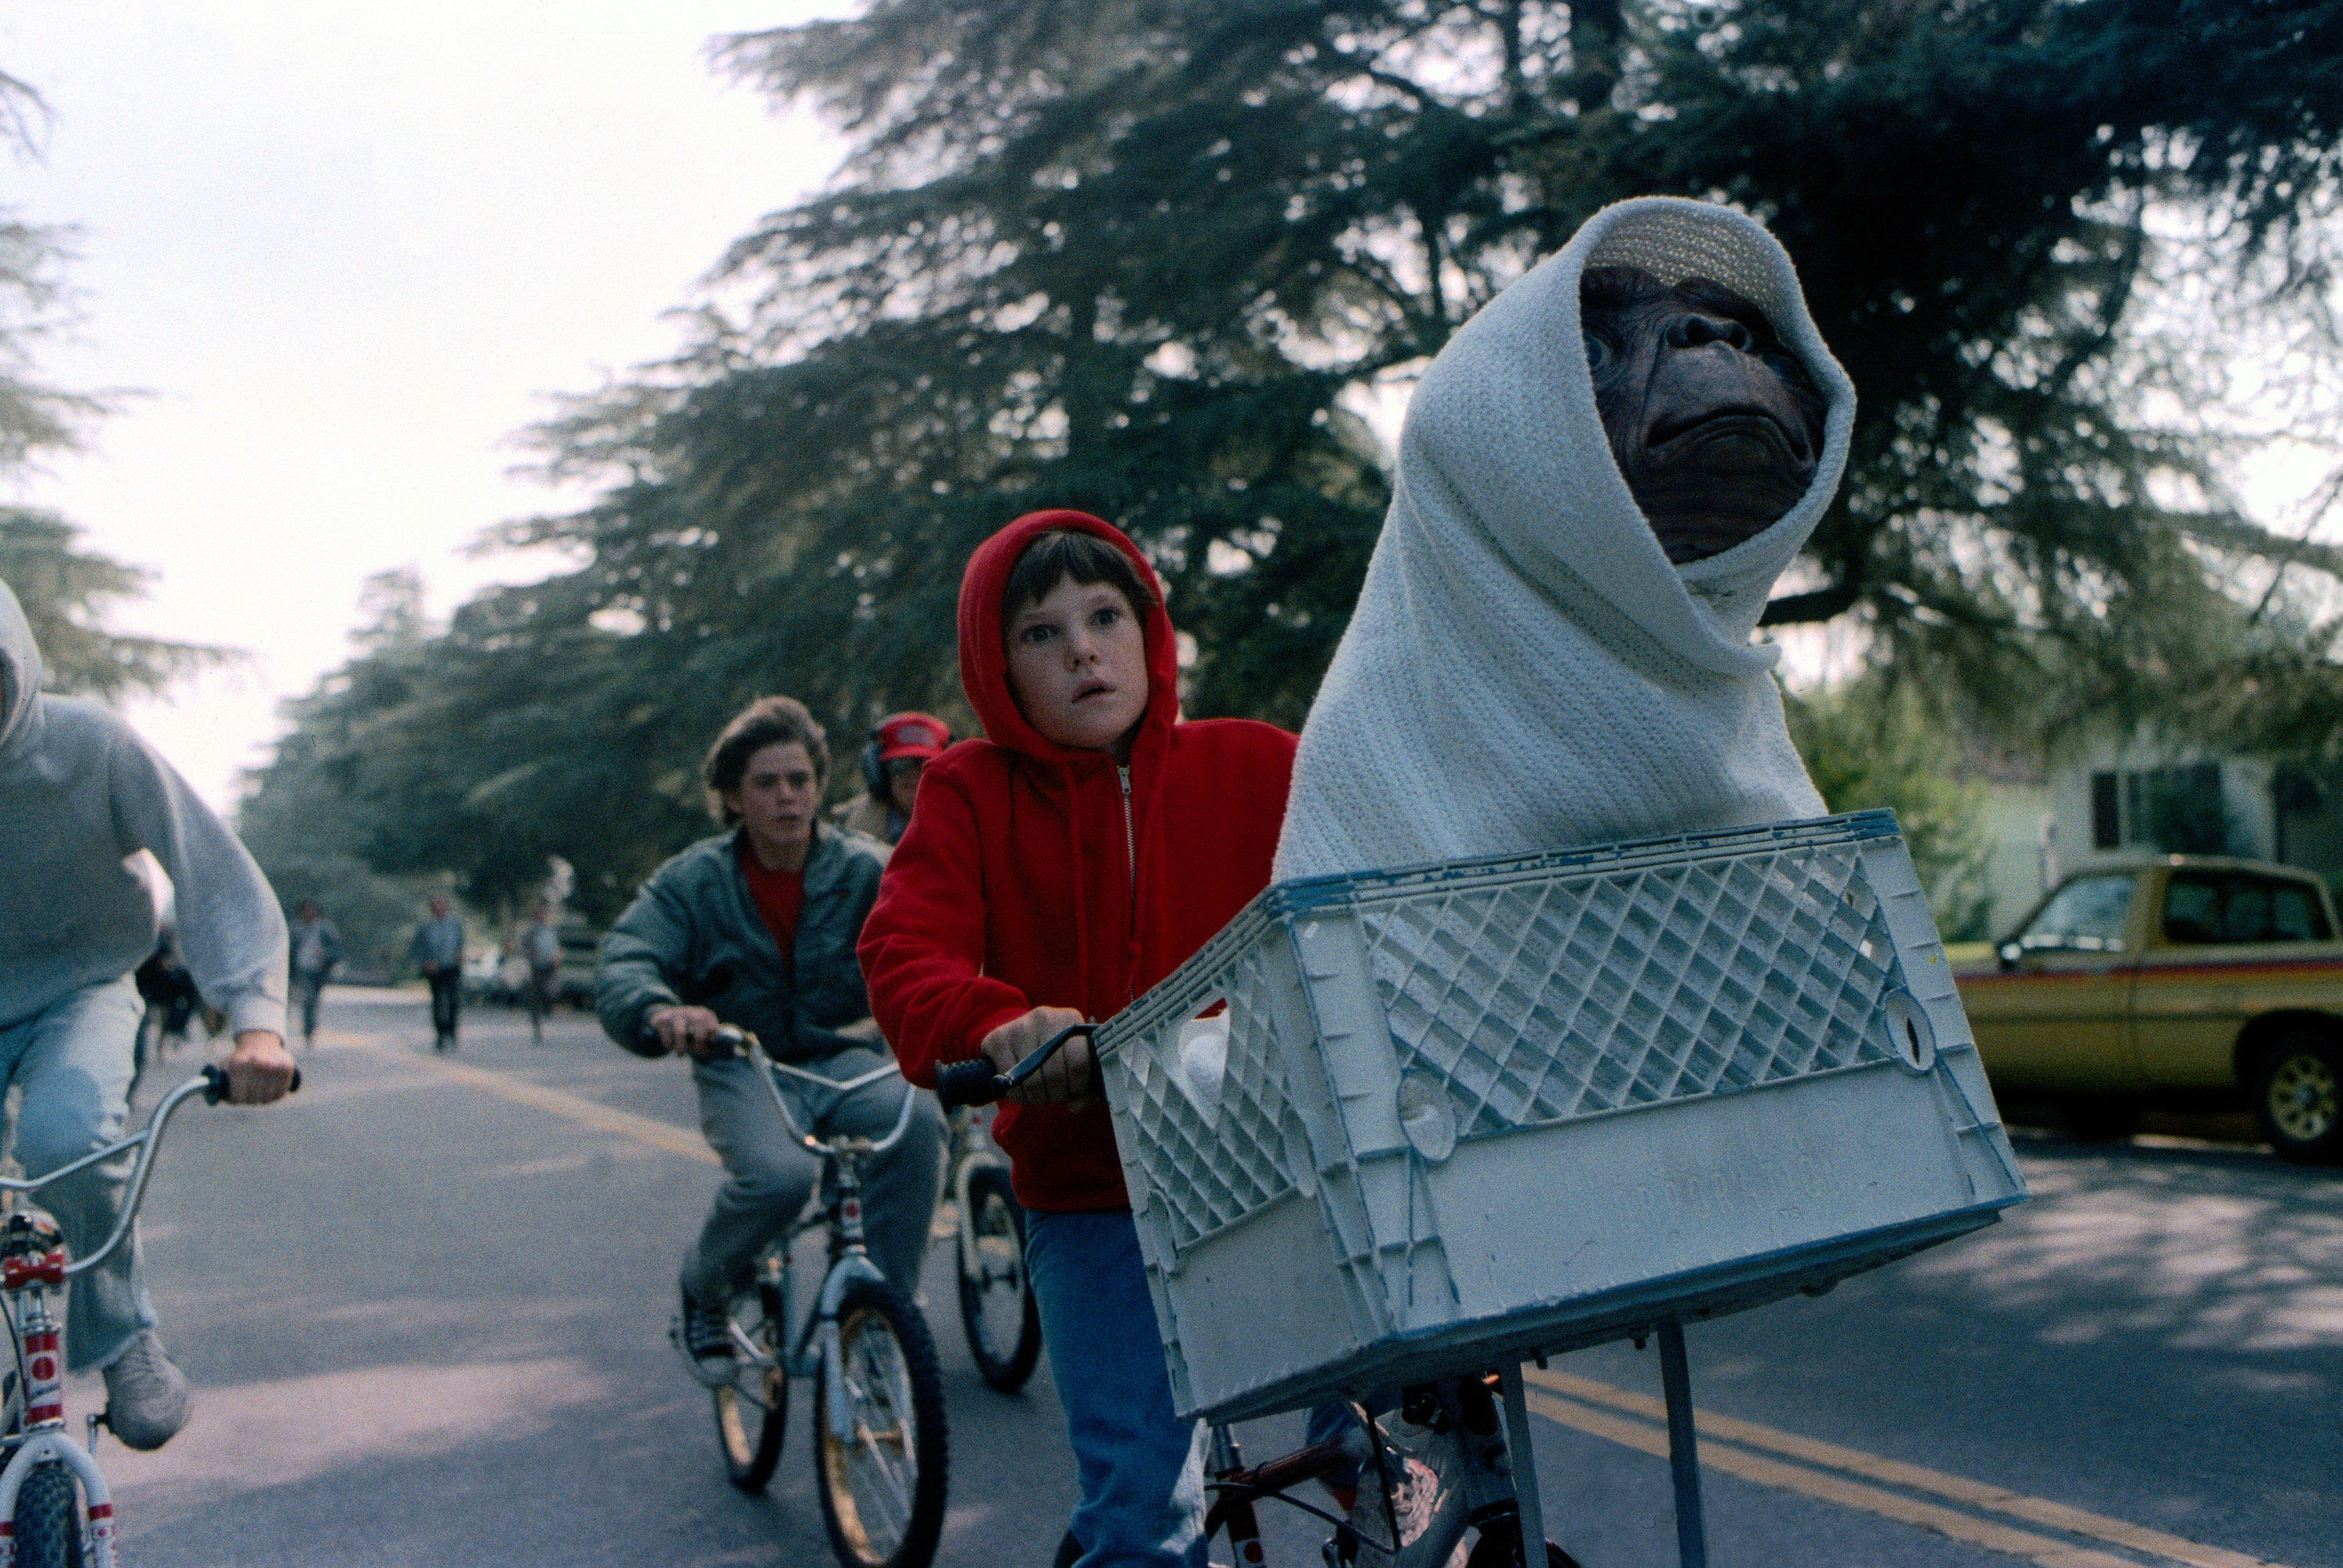 C. Thomas Howell rides a bike with ET in the basket